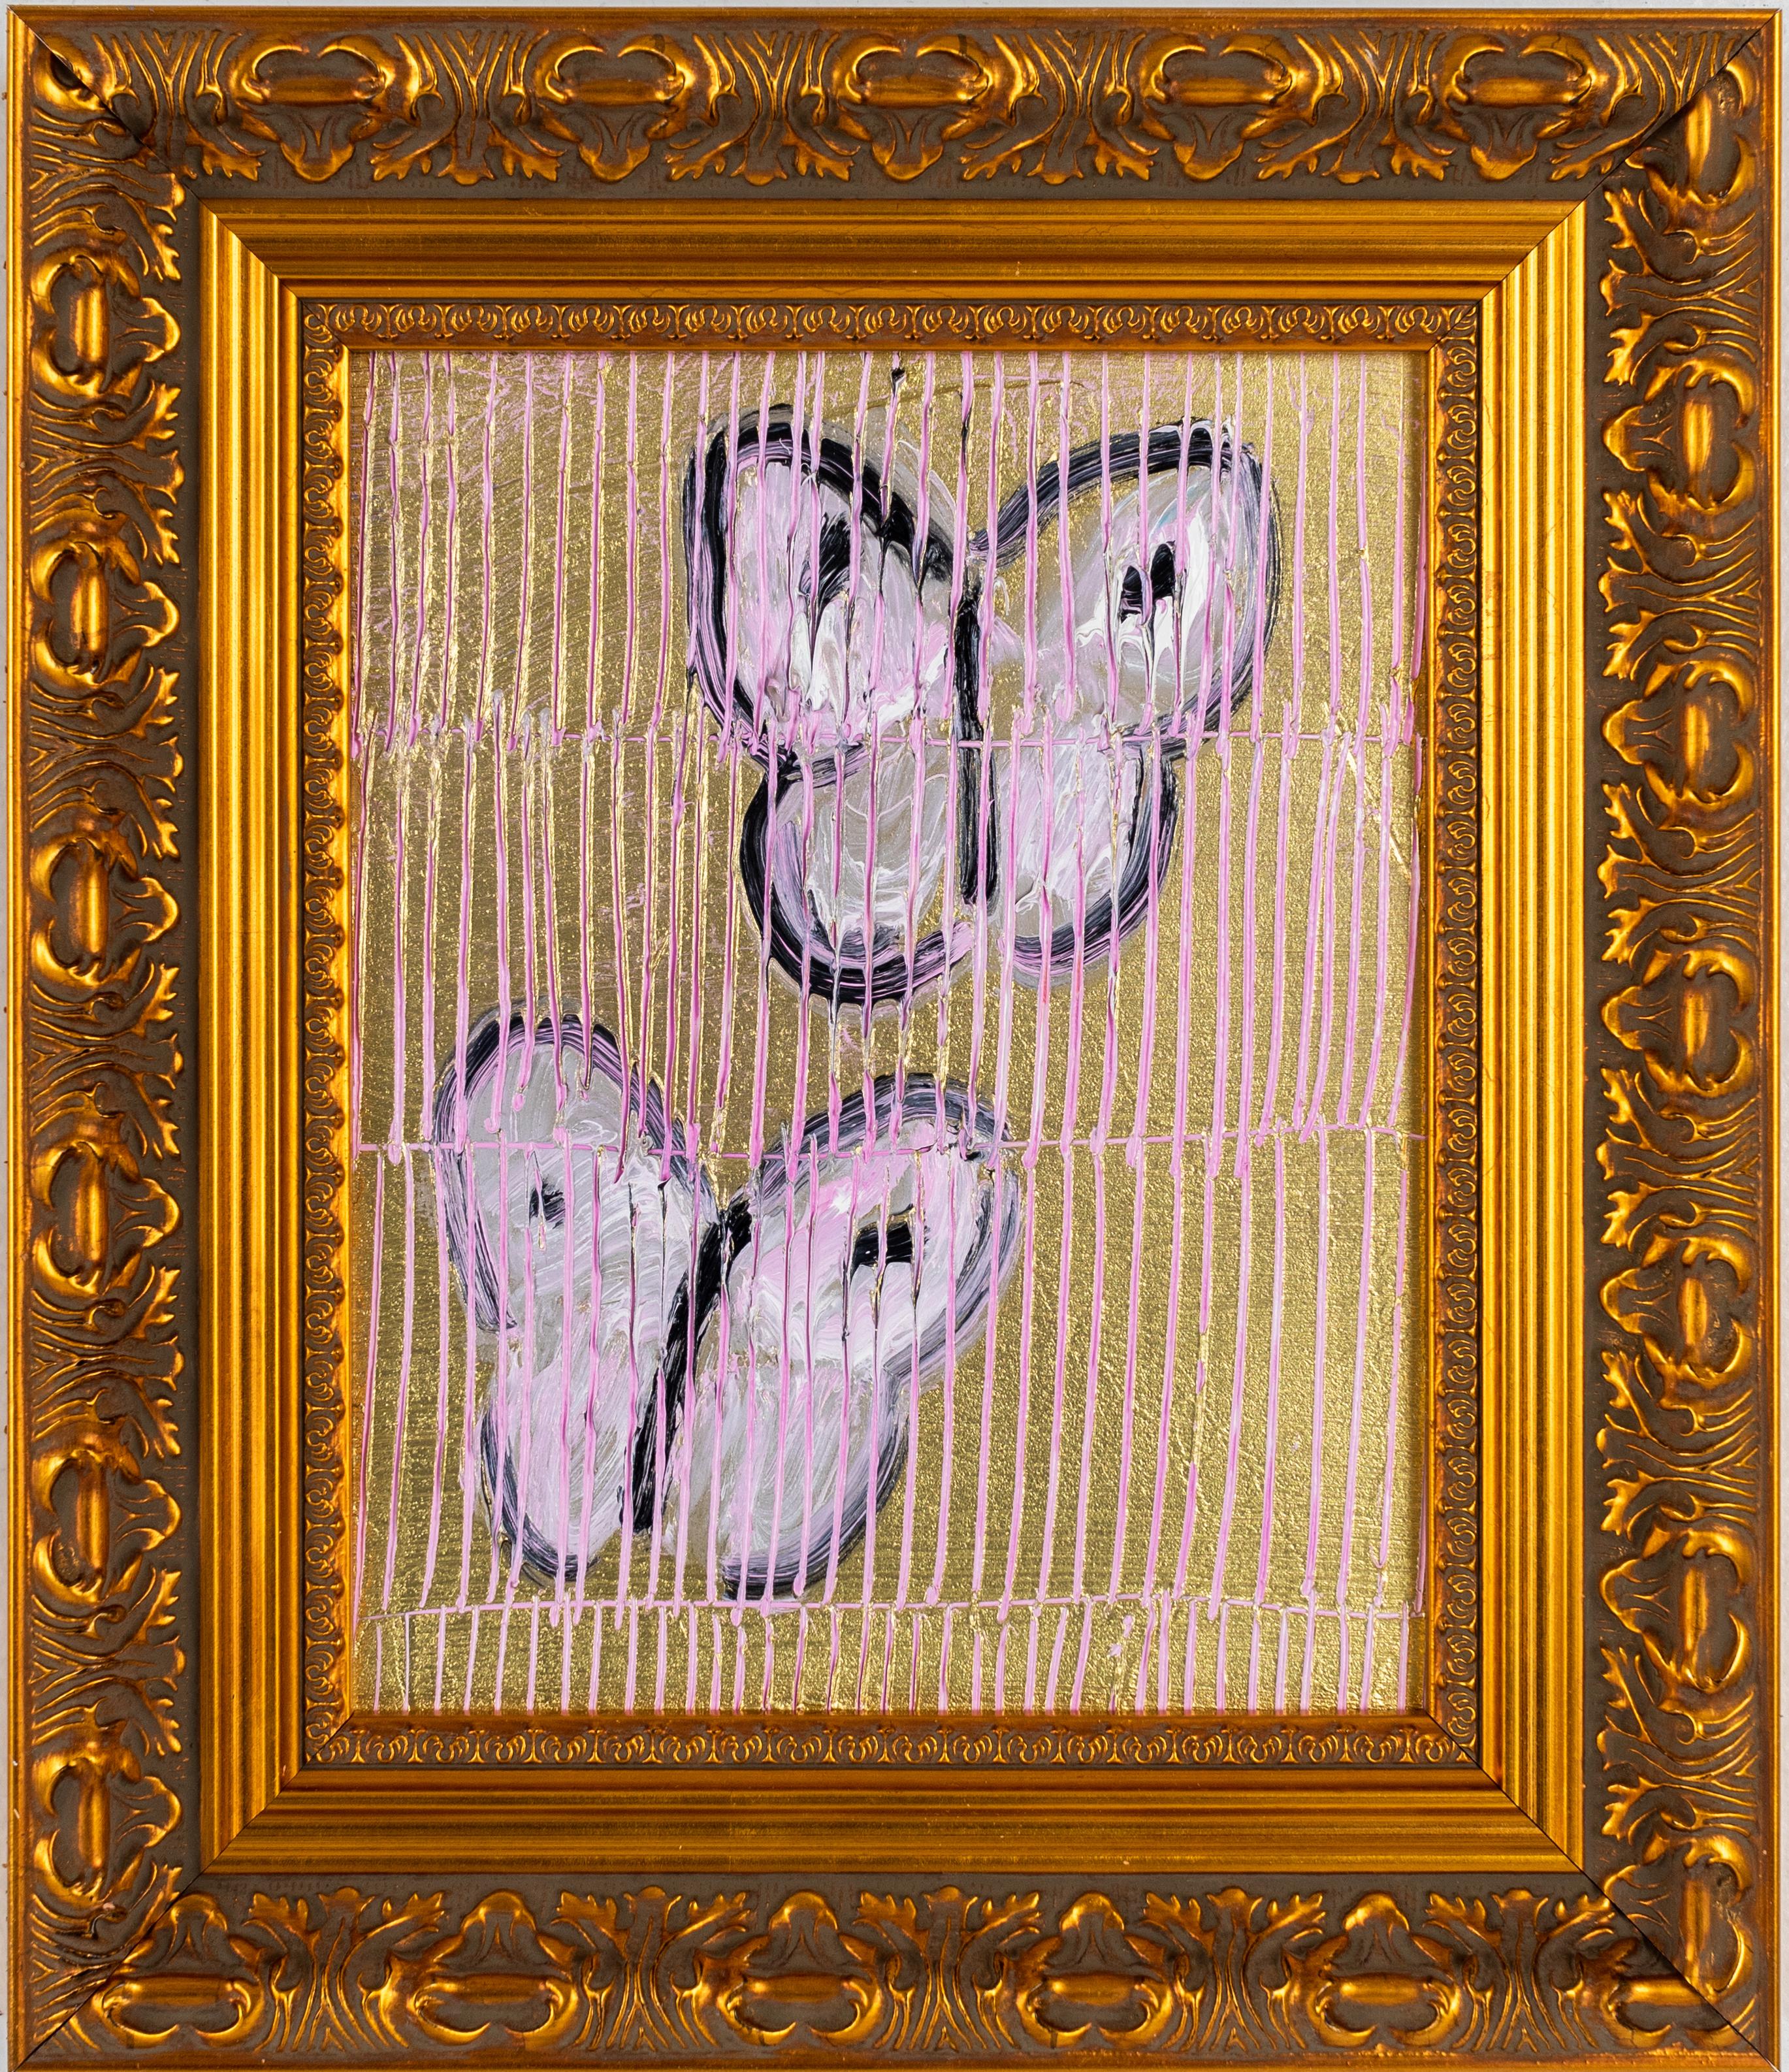 Pink and gold butterfly painting by Hunt Slonem  in vintage frame. 
Painting: 10 x 8 inches
Framed: 14.5 x 12.5  inches

New York painter, Hunt Slonem is best known for his Neo –Expressionist paintings of bunnies, tropical birds and other exotic